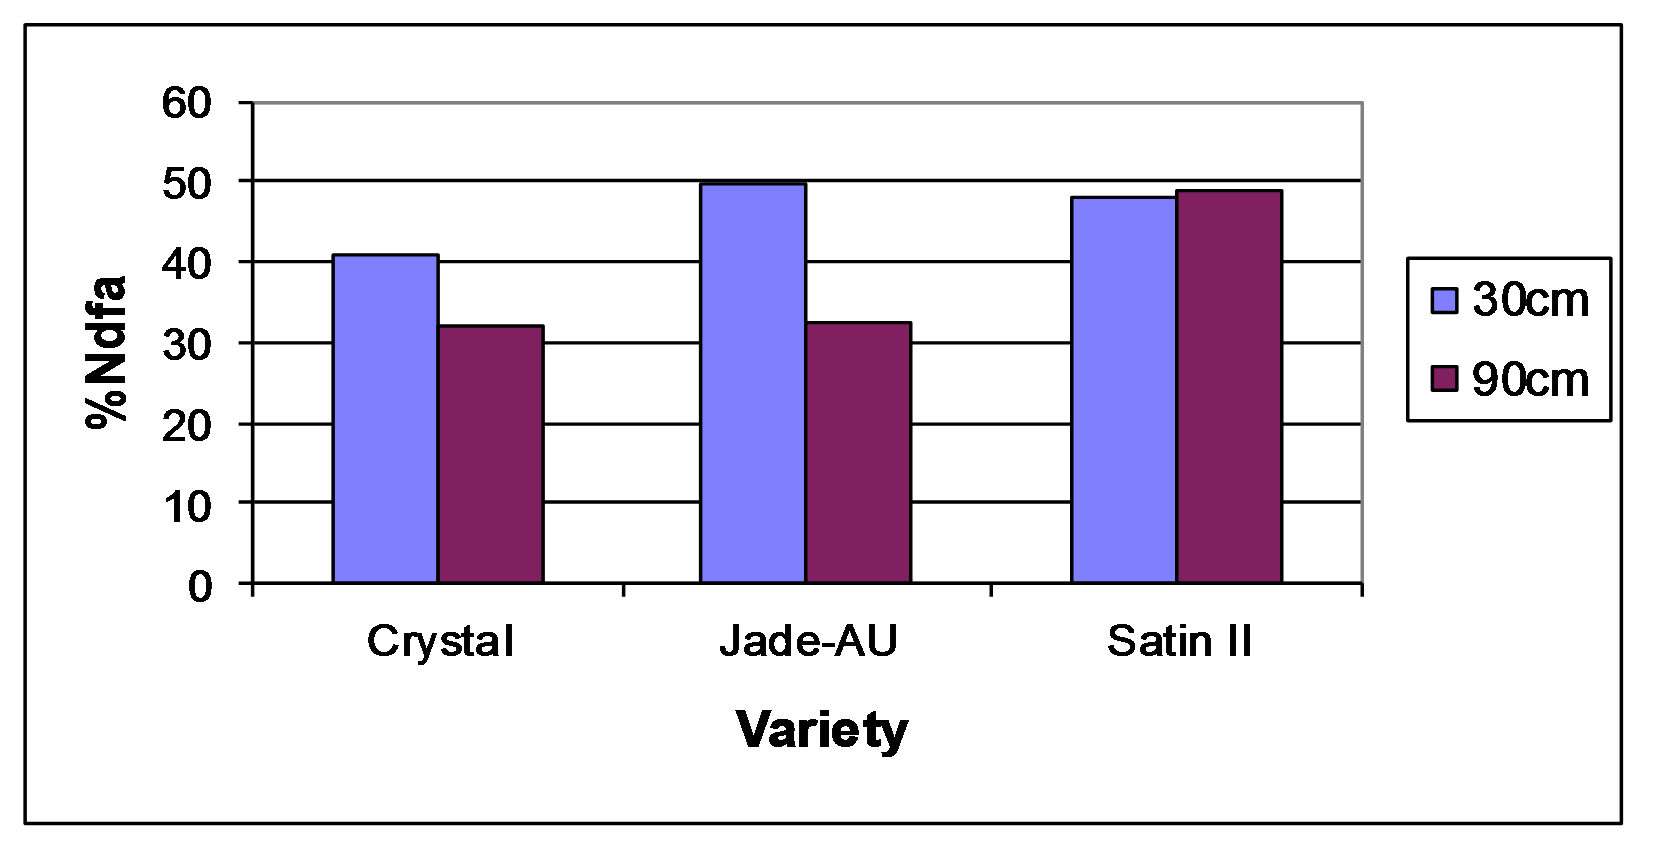 Graph shows results for Crystal, Jade-AU and Satin 2 at 30cm and 90cm row spacings. For both Crystal and Jade-AU N were higher at 30cm and Satin 2 almost the same at both row spacings. Text description follows.